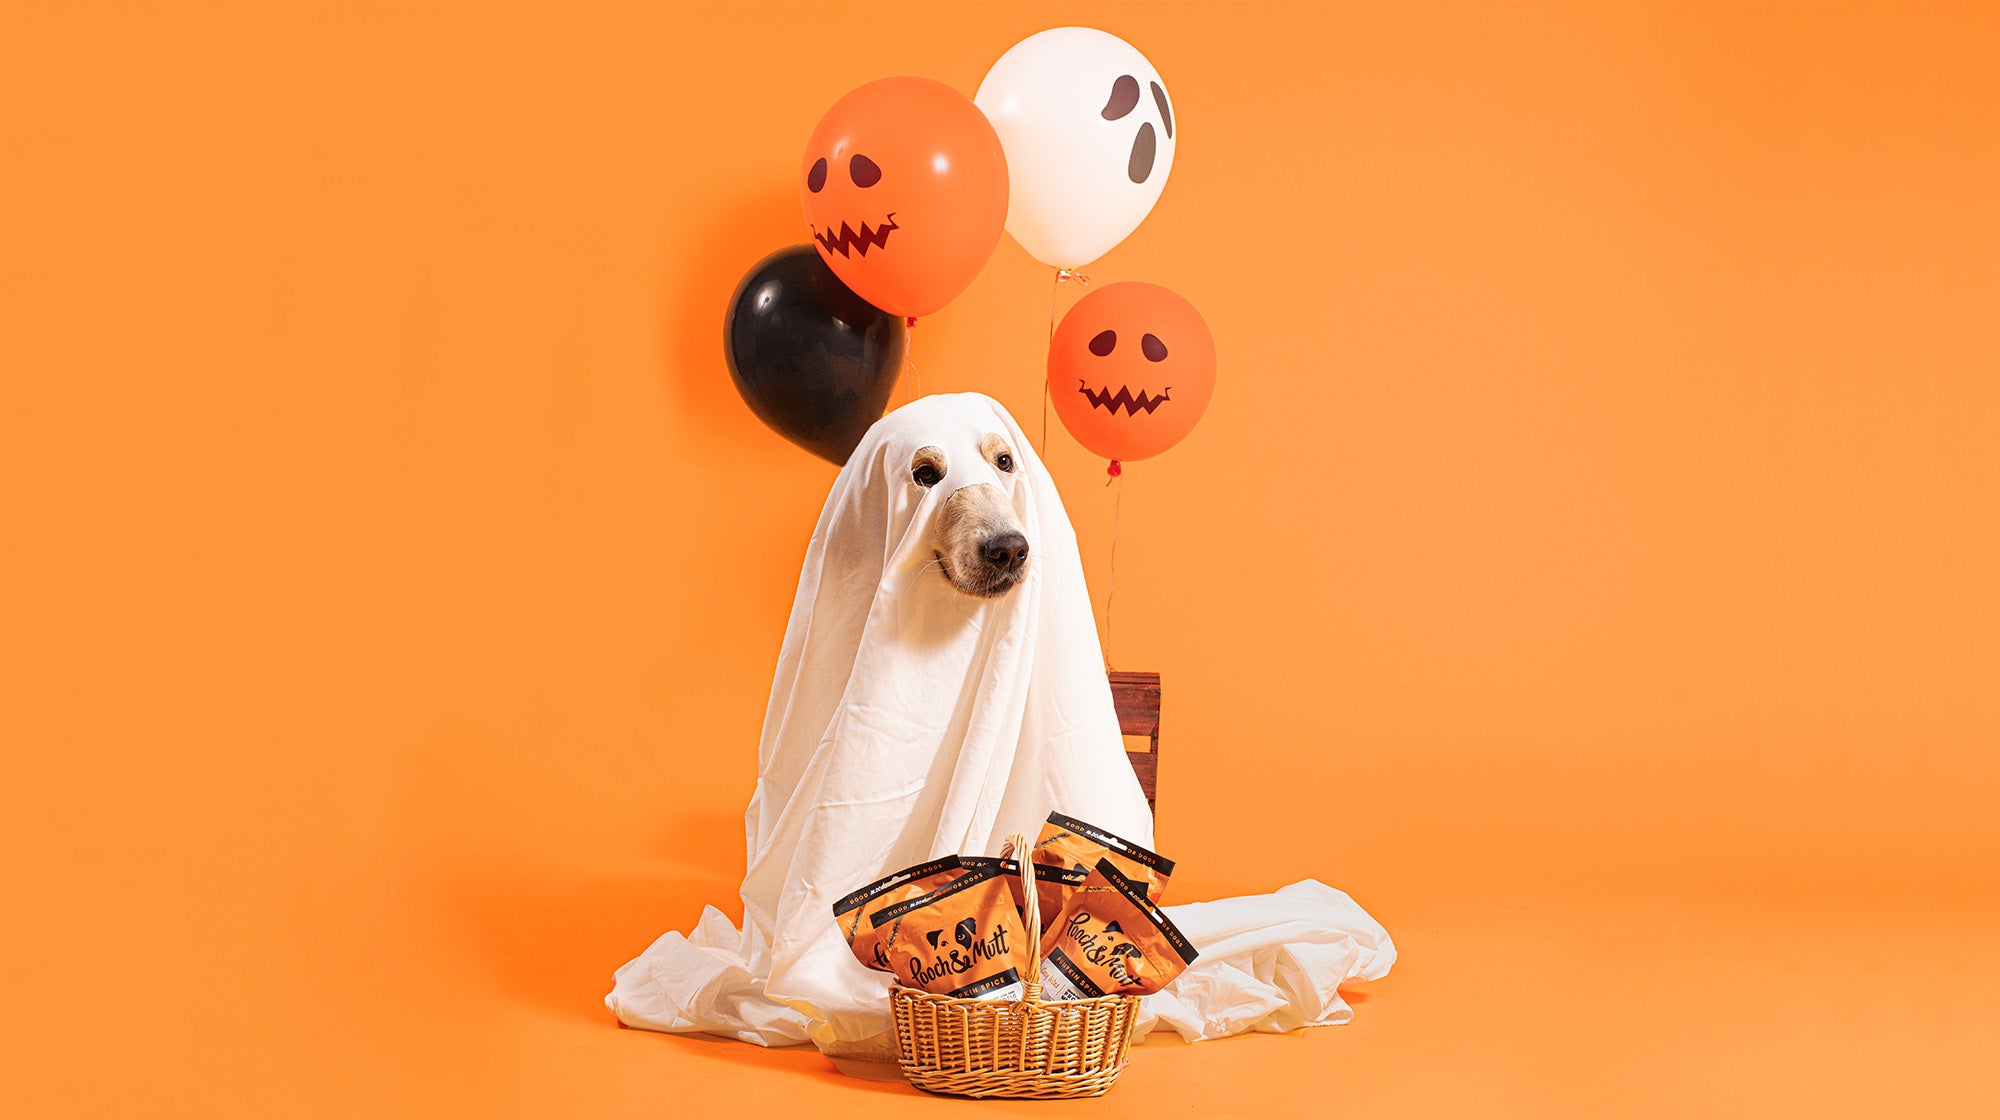 A dog dressed as a ghost with a sheet over it, with some Halloween balloons against an orange background